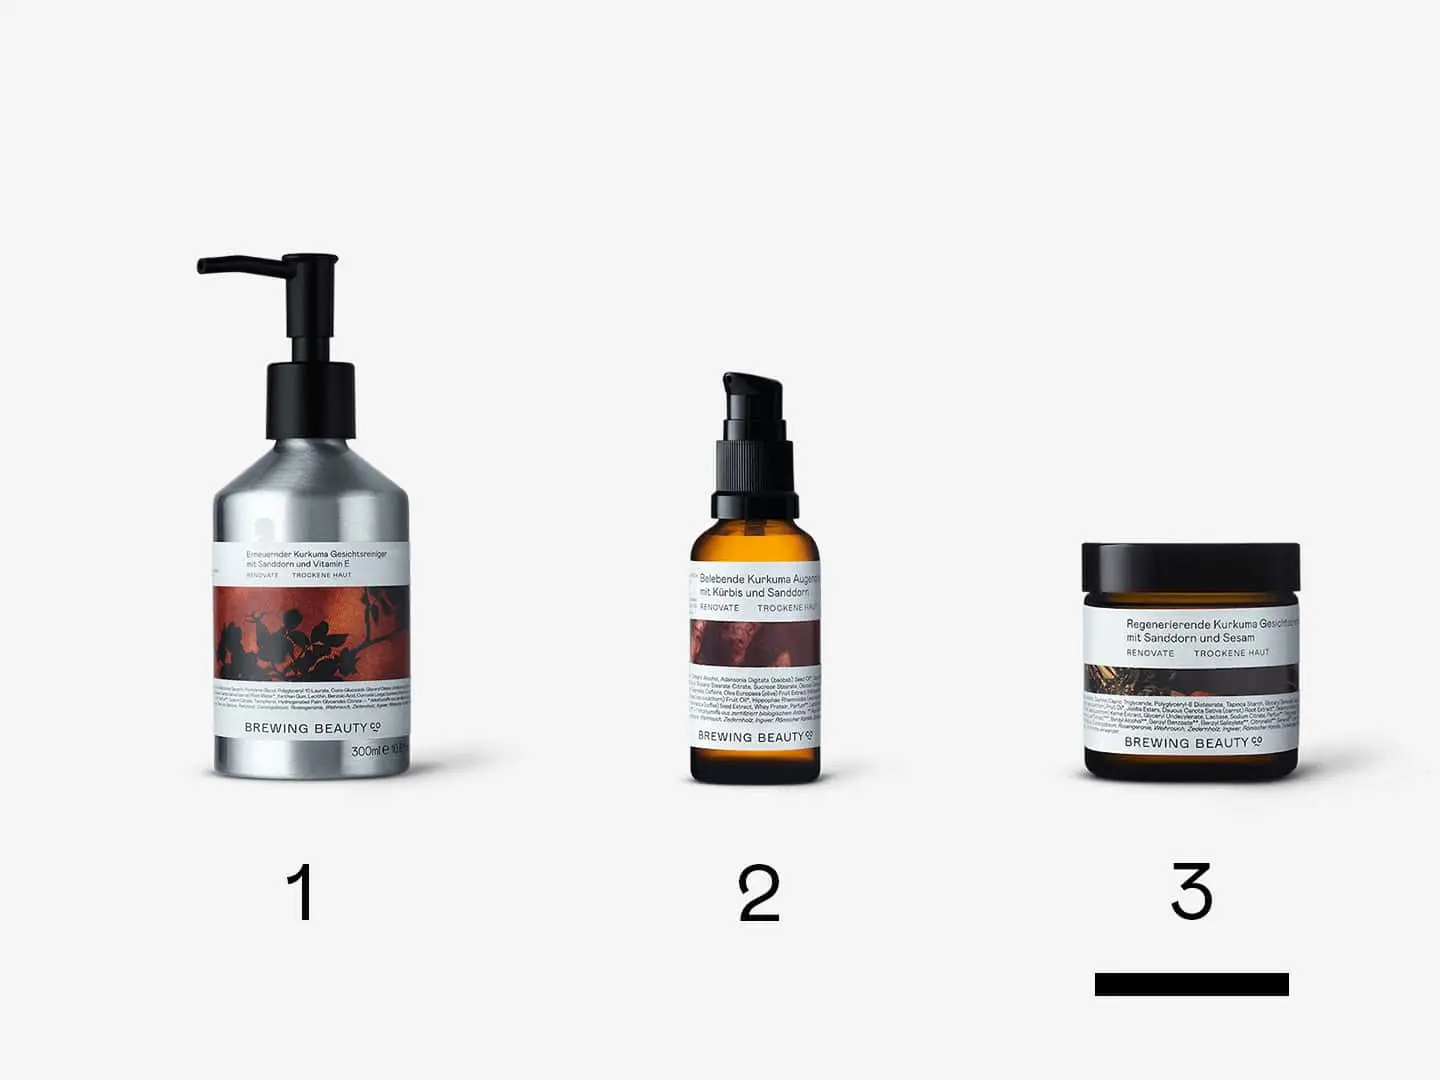 A lineup of Brewing Beauty products representing Routine No.41 